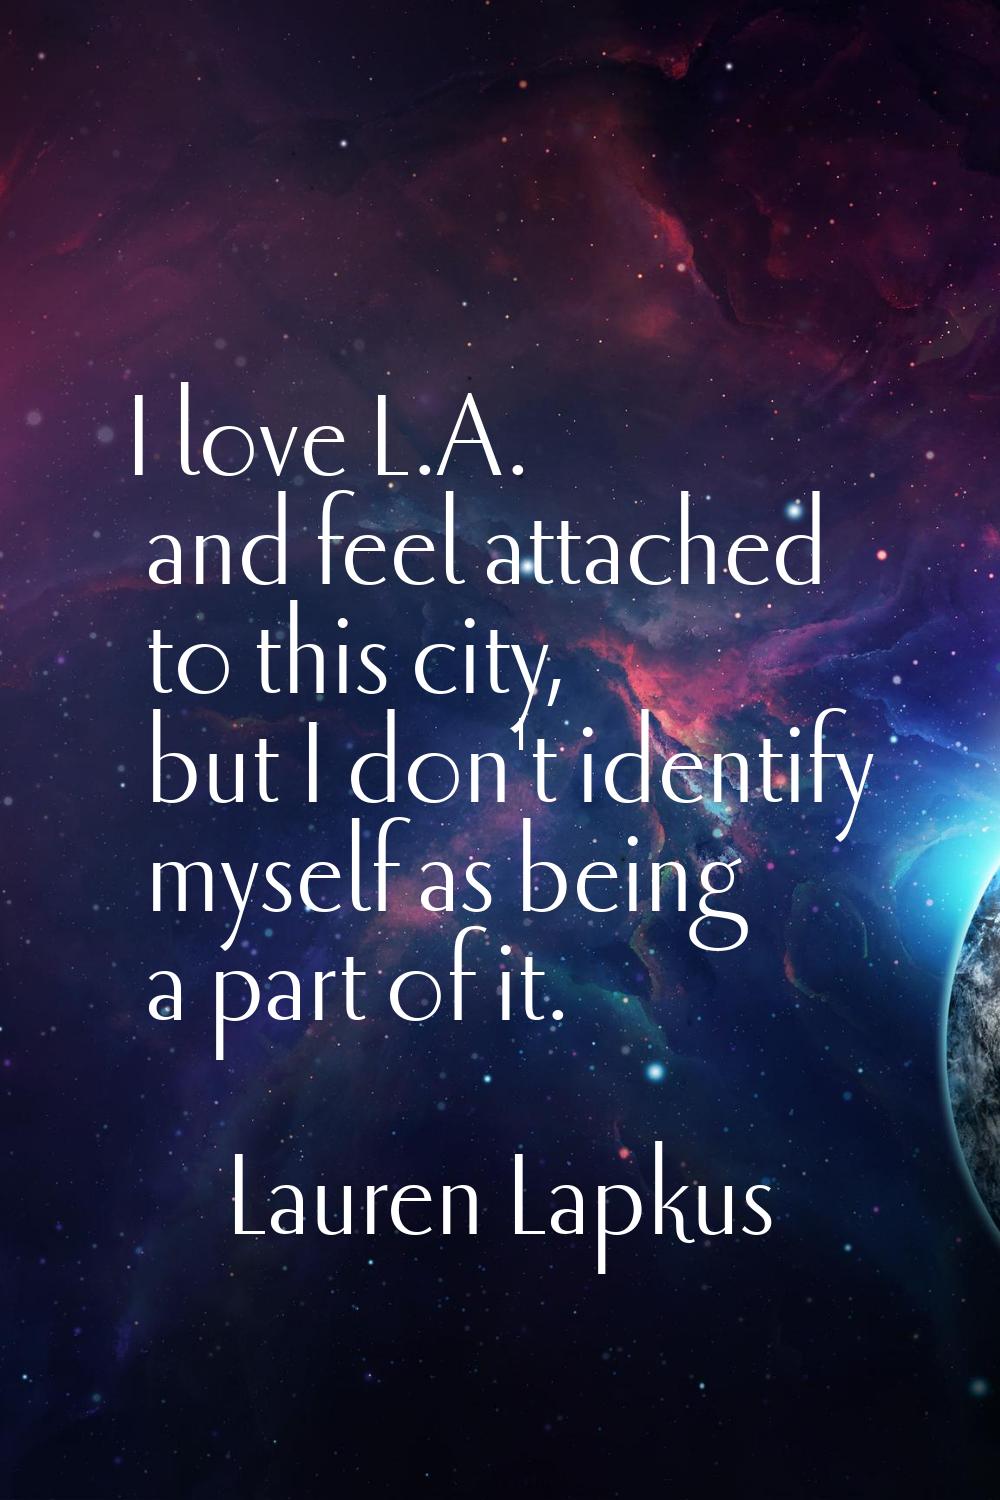 I love L.A. and feel attached to this city, but I don't identify myself as being a part of it.